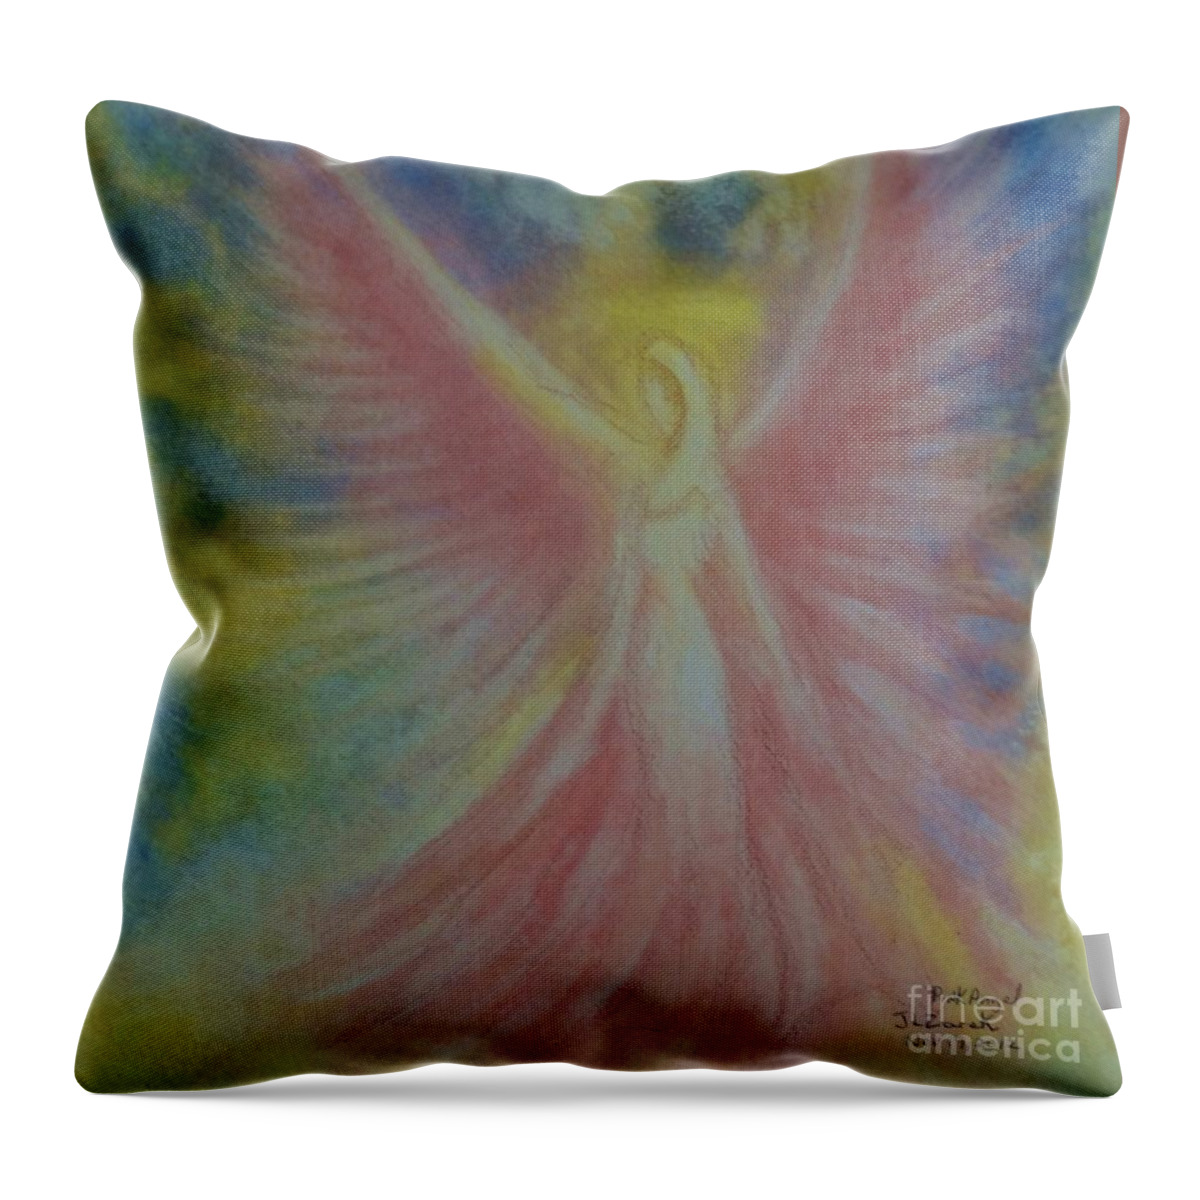 Angel Prints Throw Pillow featuring the painting Pink Angel by J L Zarek